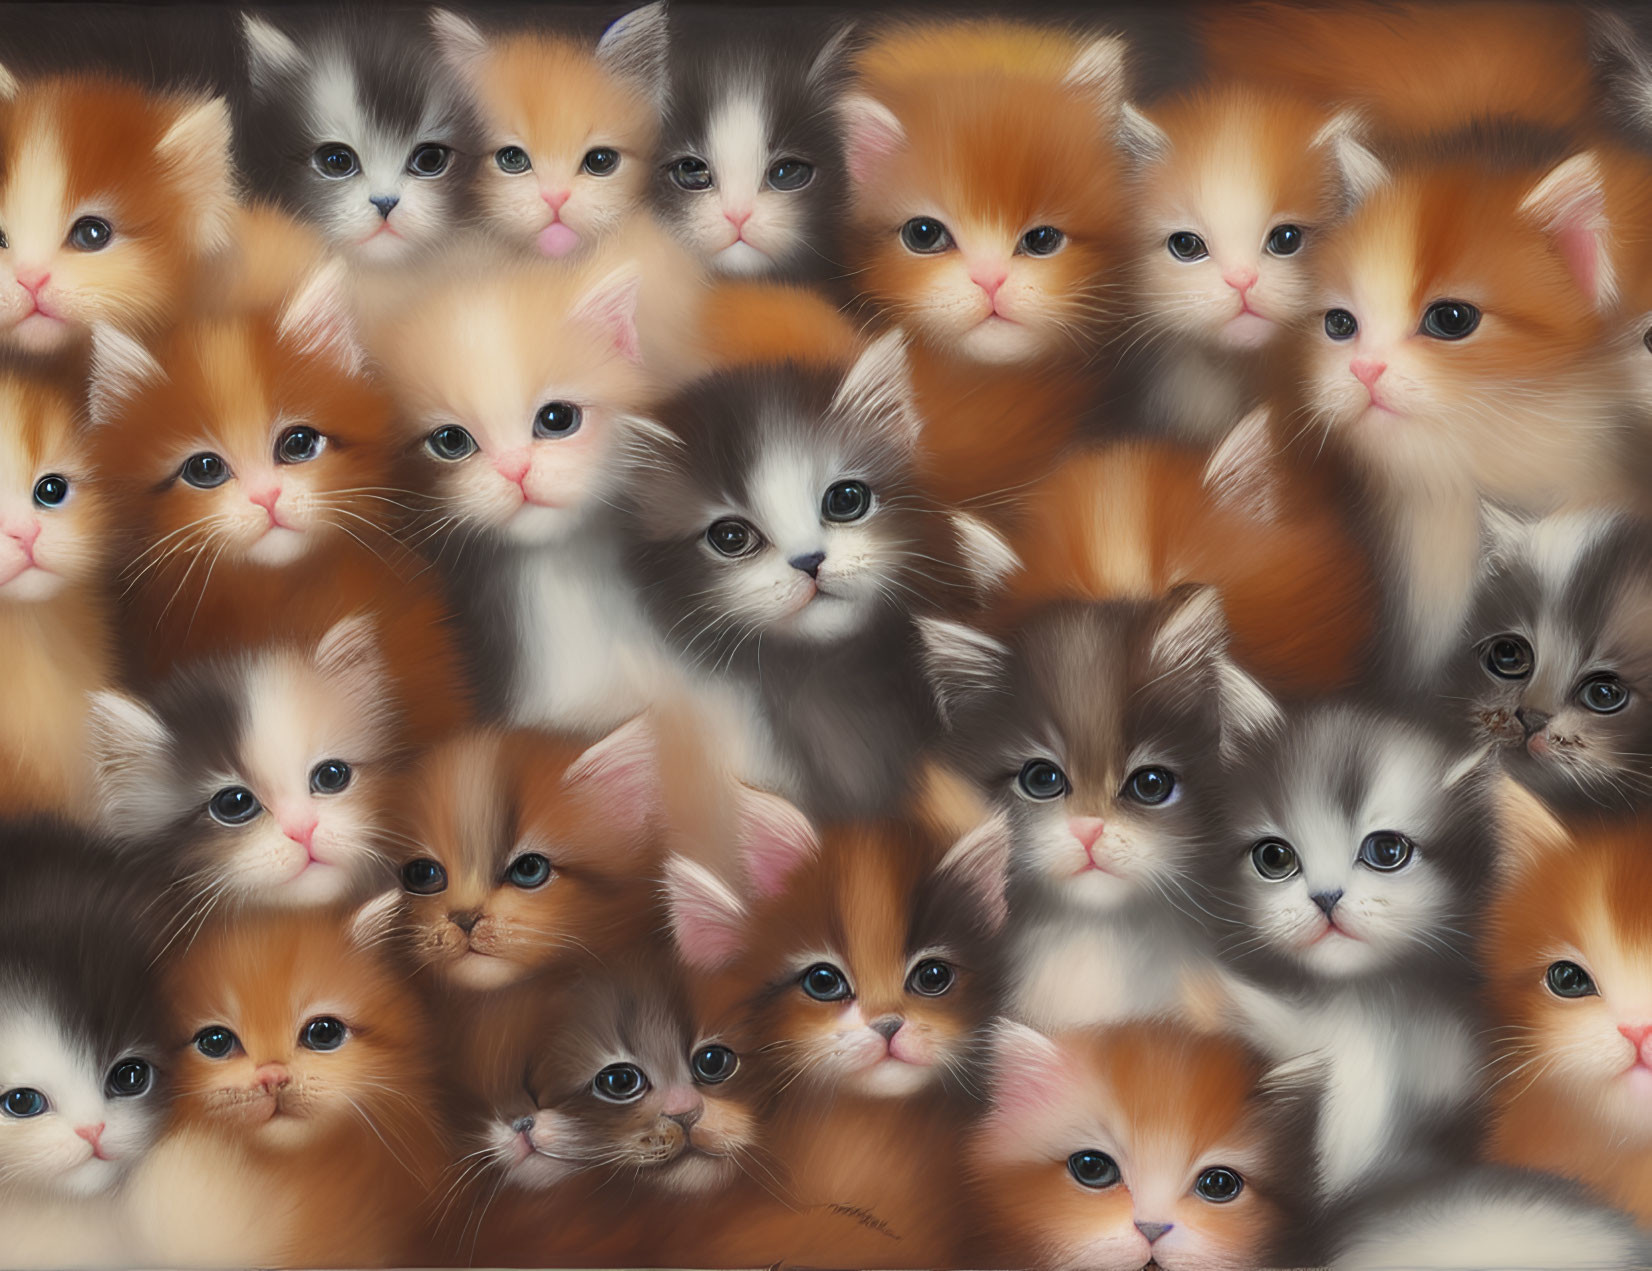 Various Orange, White, and Grey Fluffy Kittens Staring at Viewer